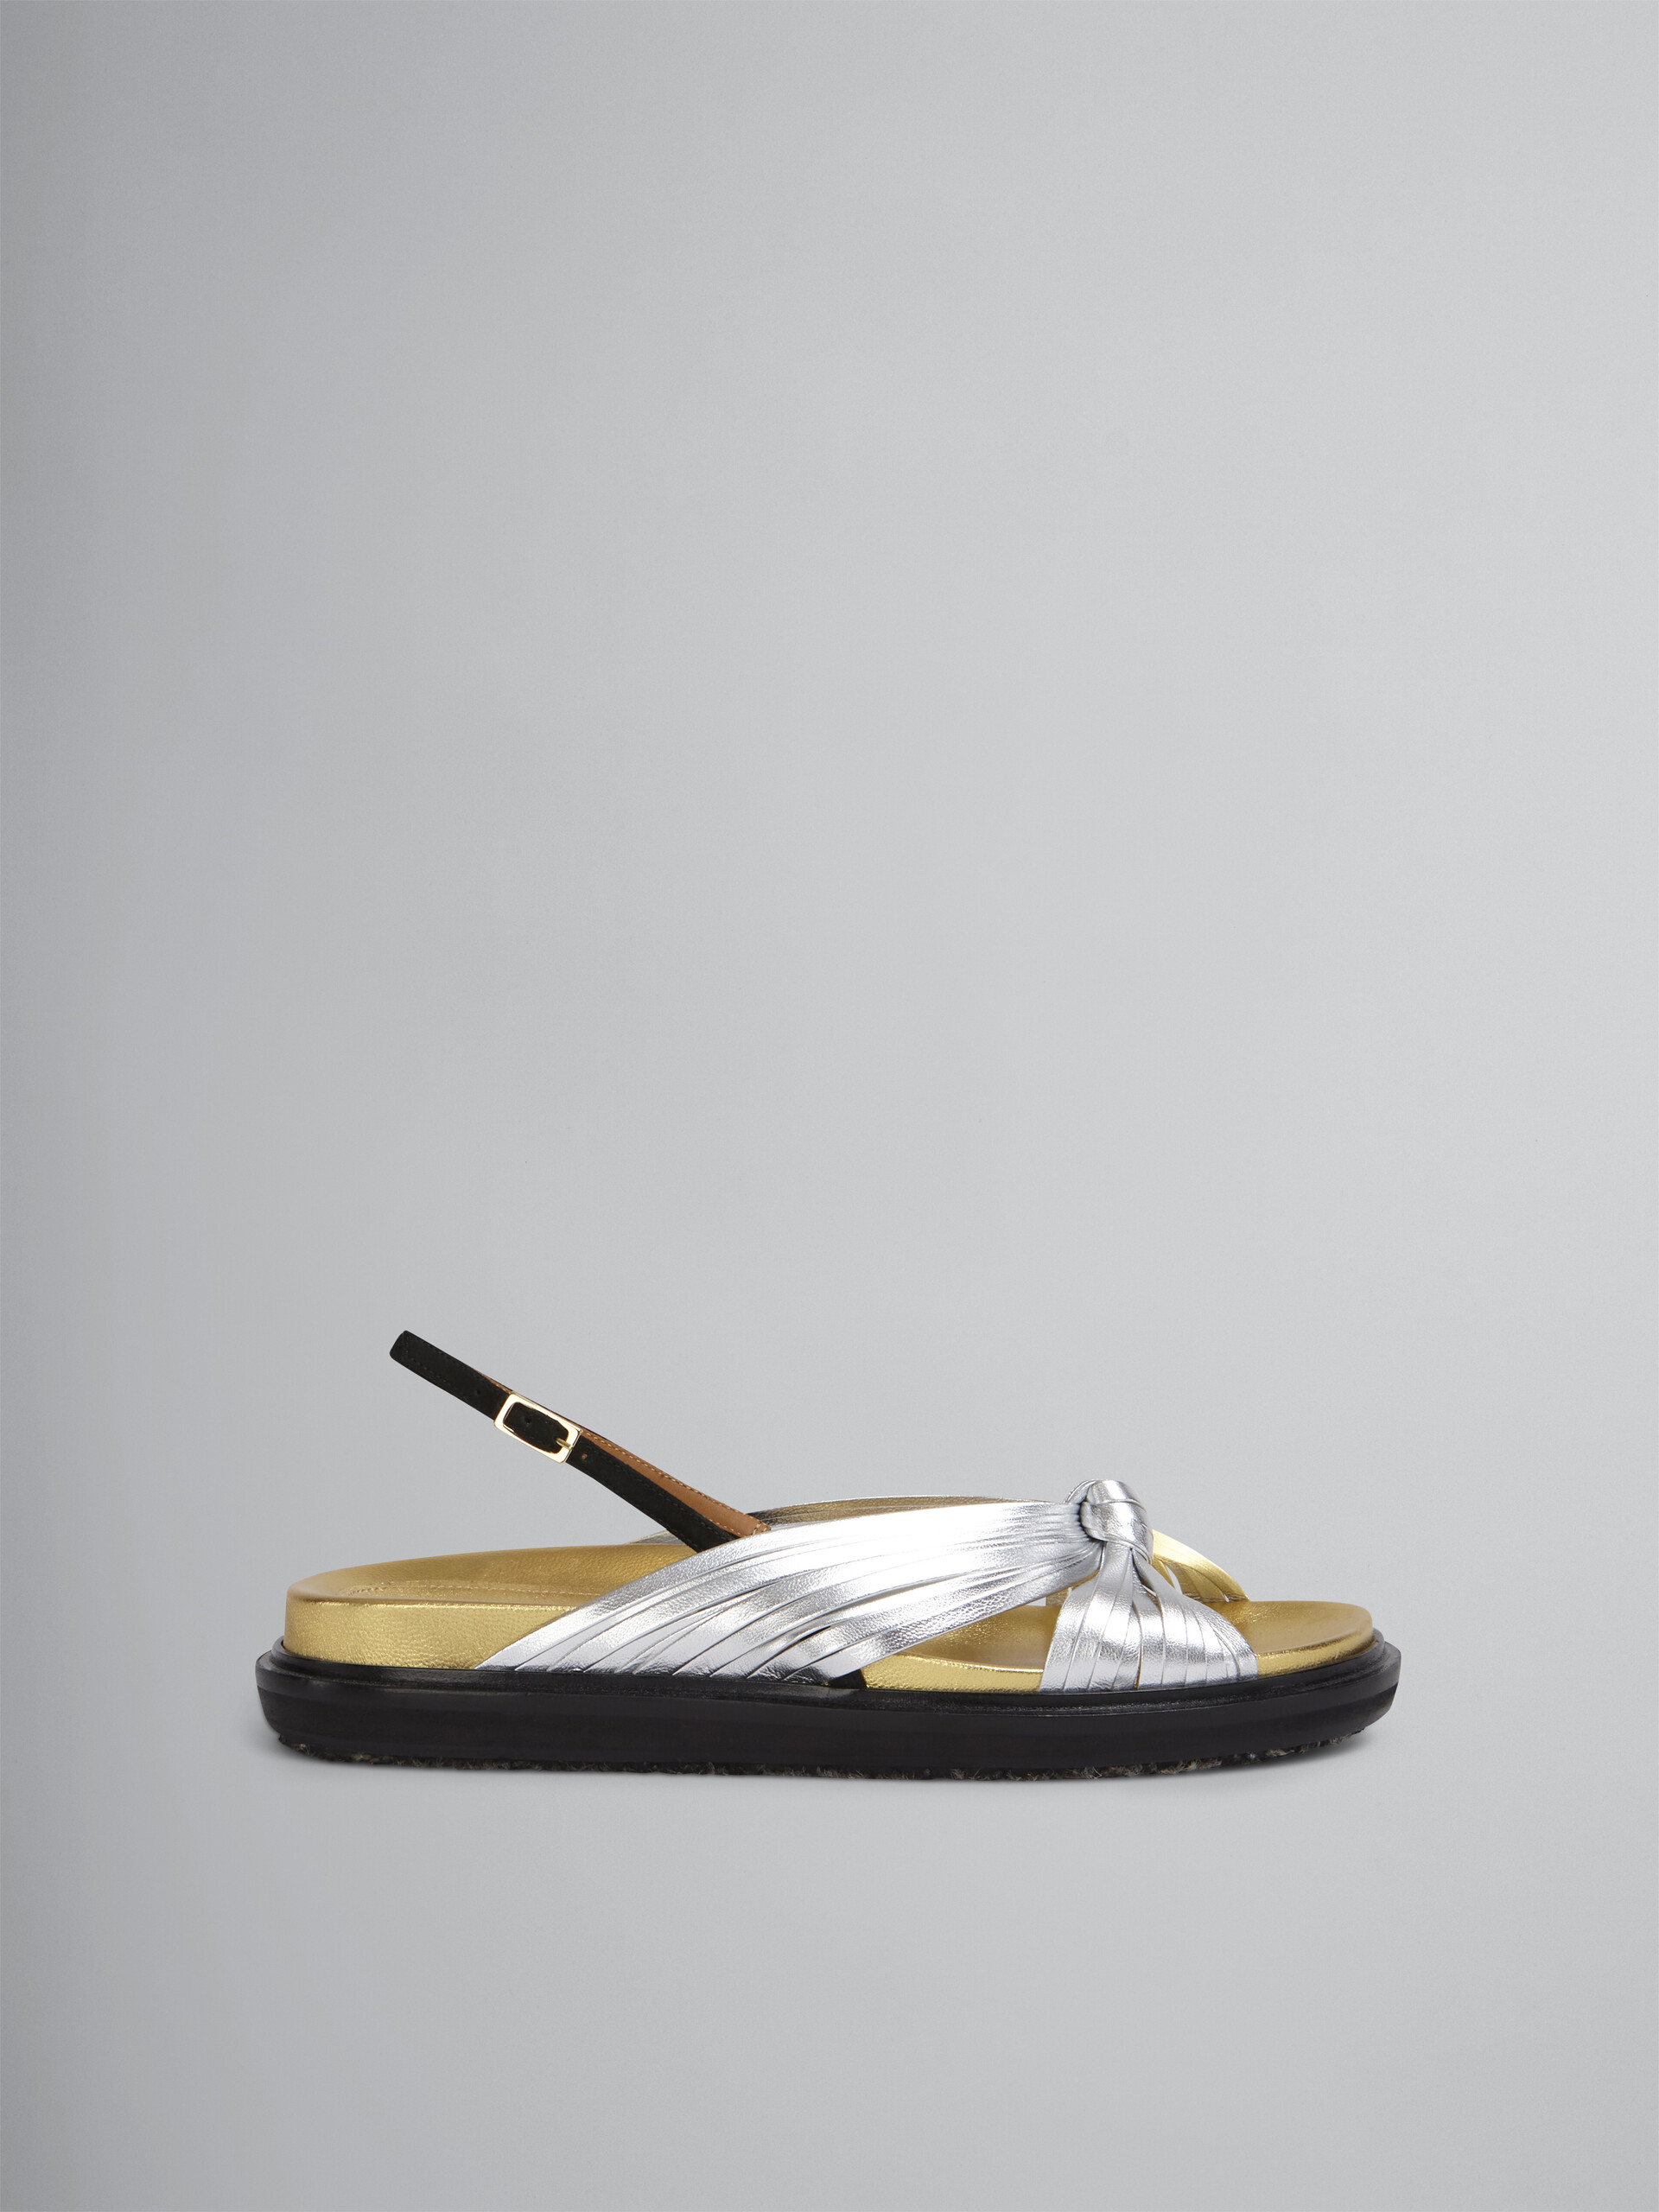 Silver laminated leather Fussbett - Sandals - Image 1